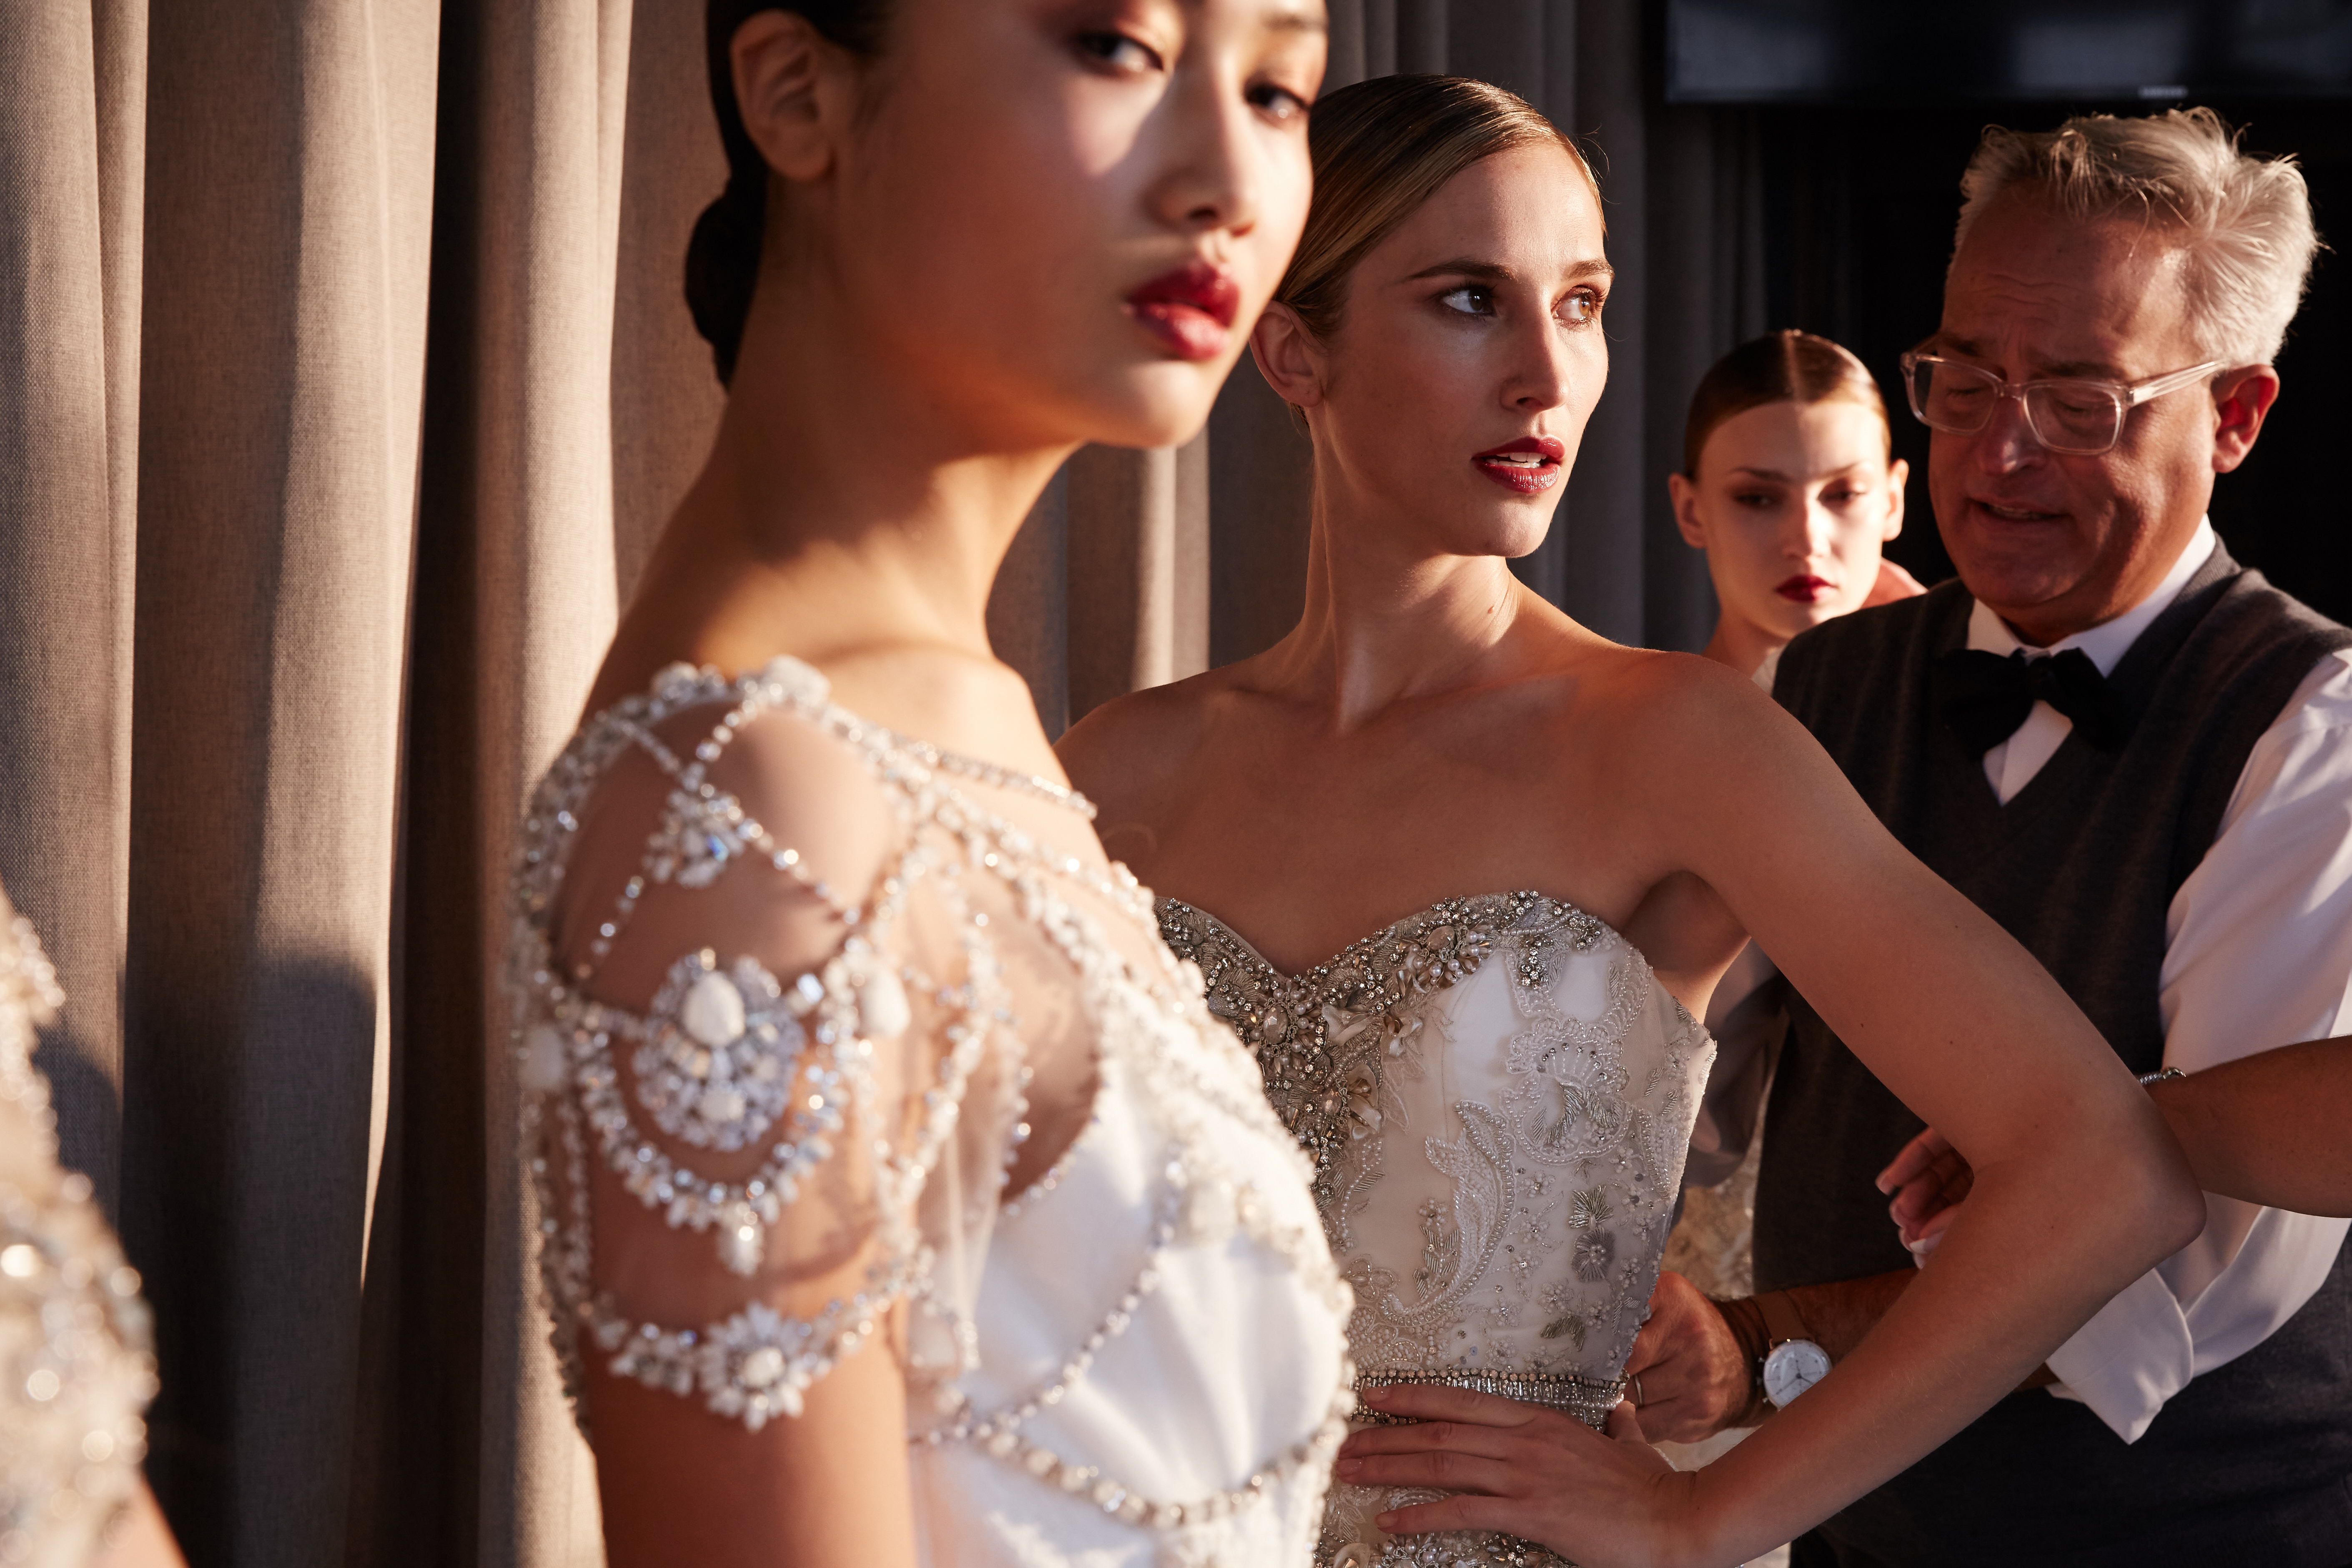 The NYFW: Bridal Schedule is Live, News